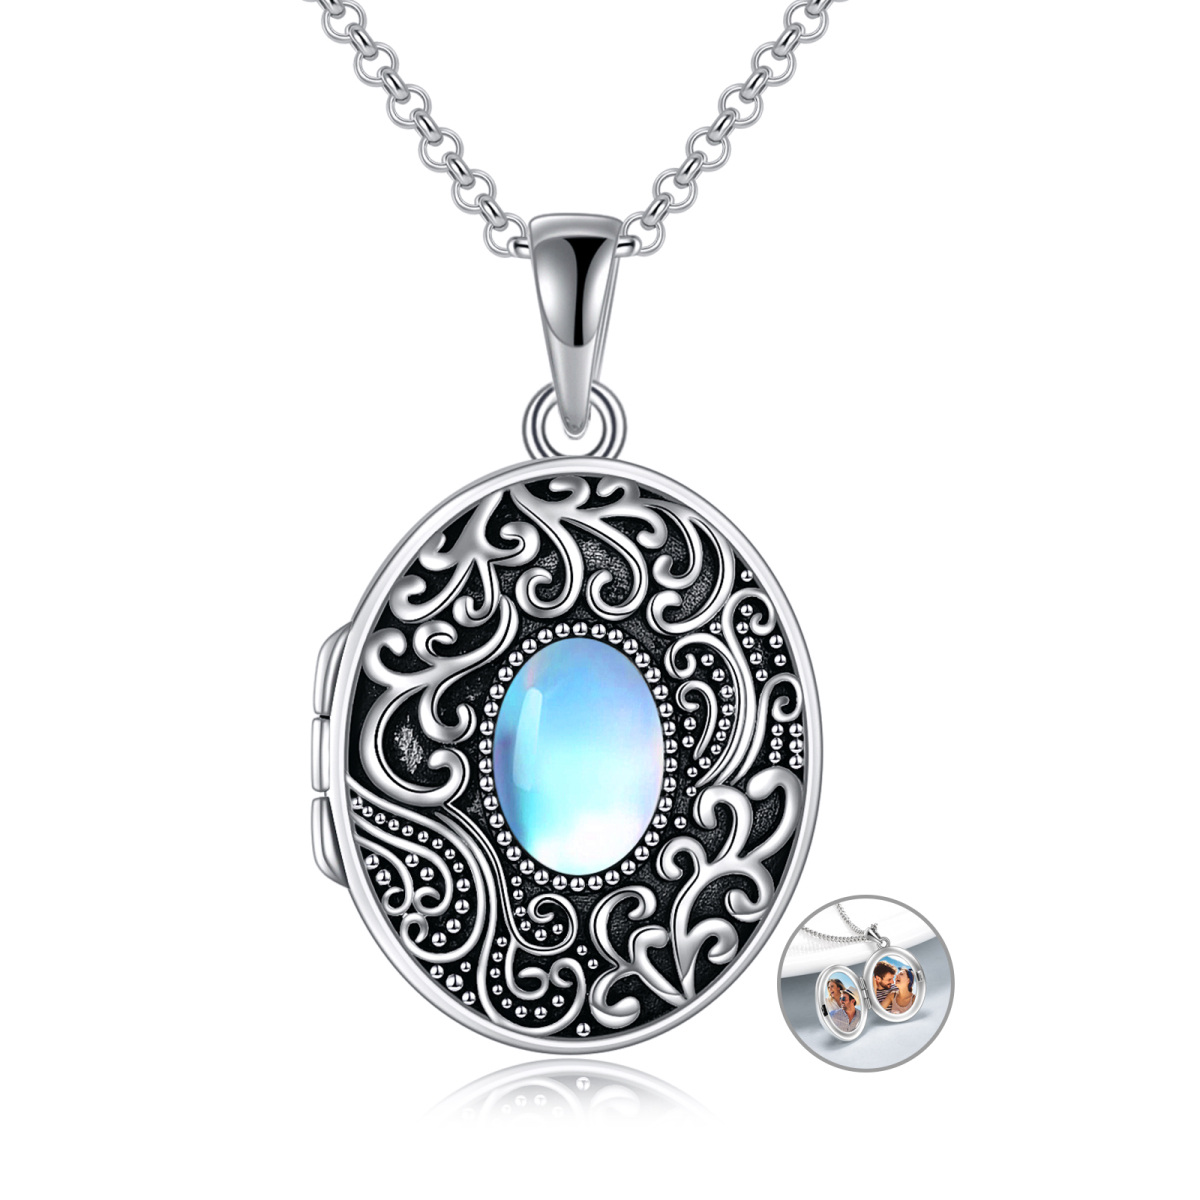 Sterling Silver Oval Moonstone Personalized Photo Personalized Photo Locket Necklace with Engraved Word-1